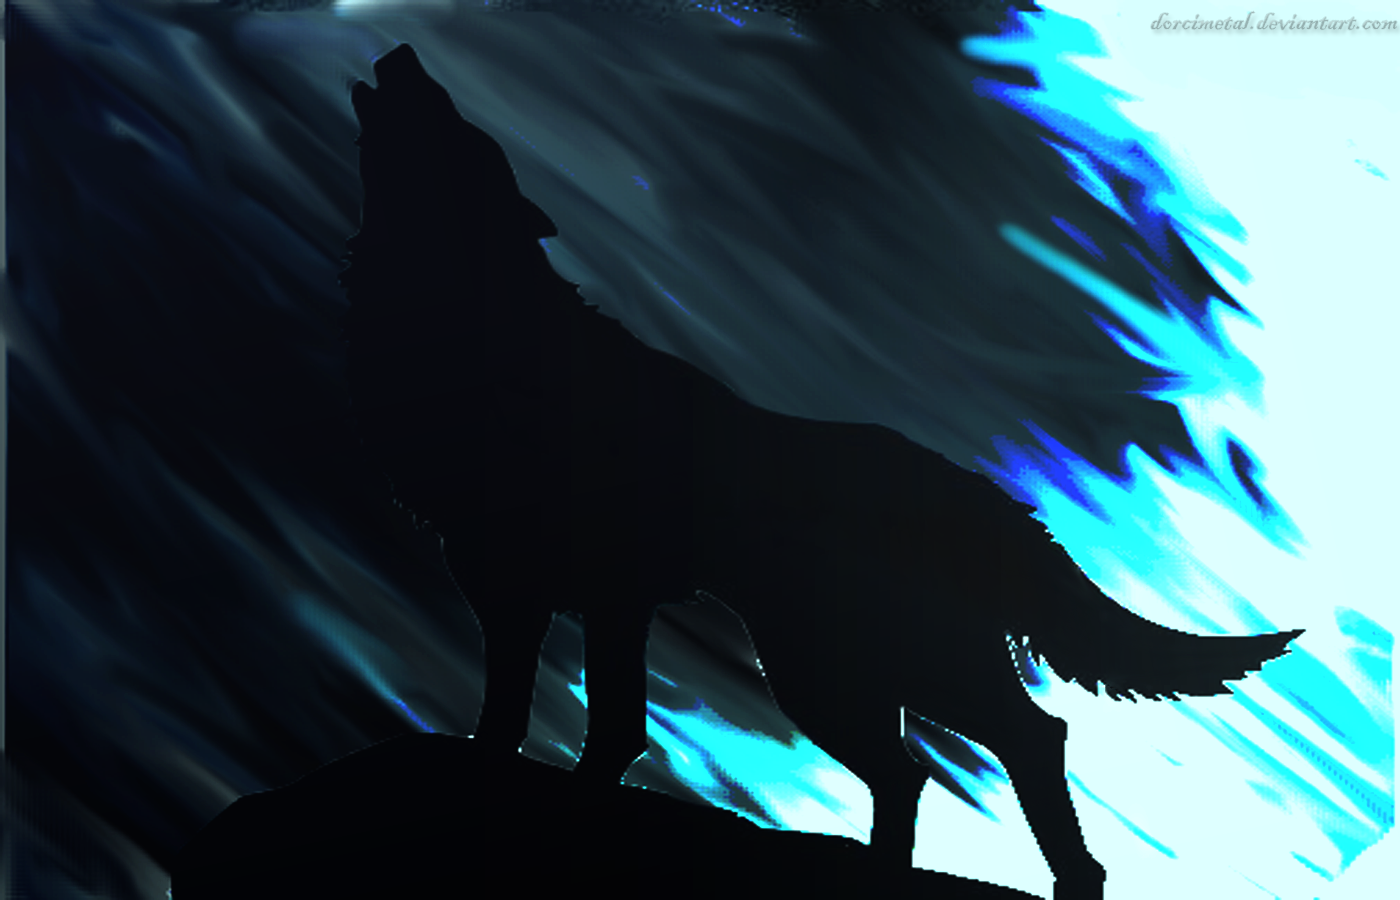 Howling Wolf Wallpaper By Dorcimetal